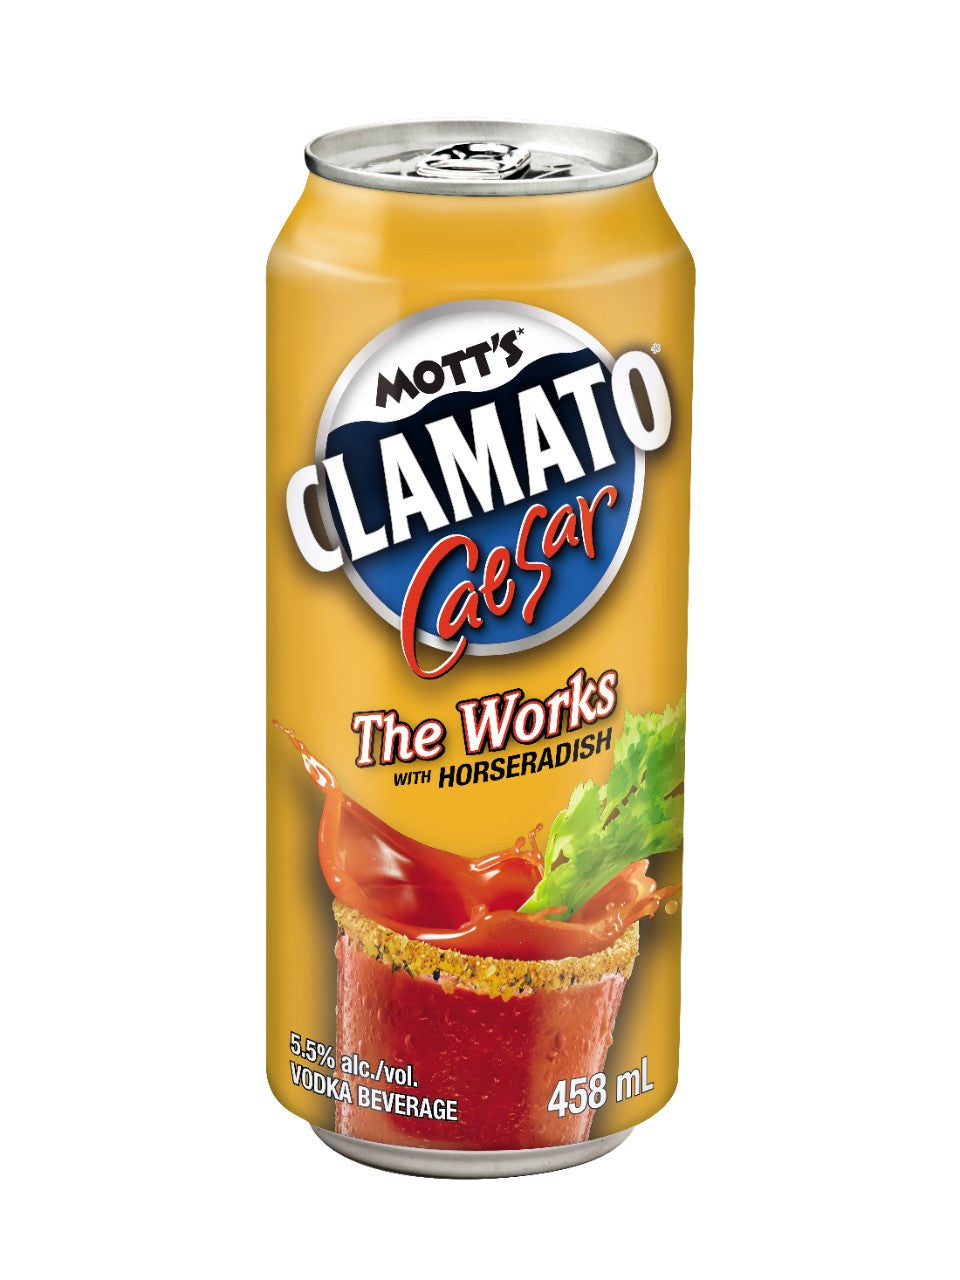 MOTTS CLAMATO WORKS 1CAN 458mL